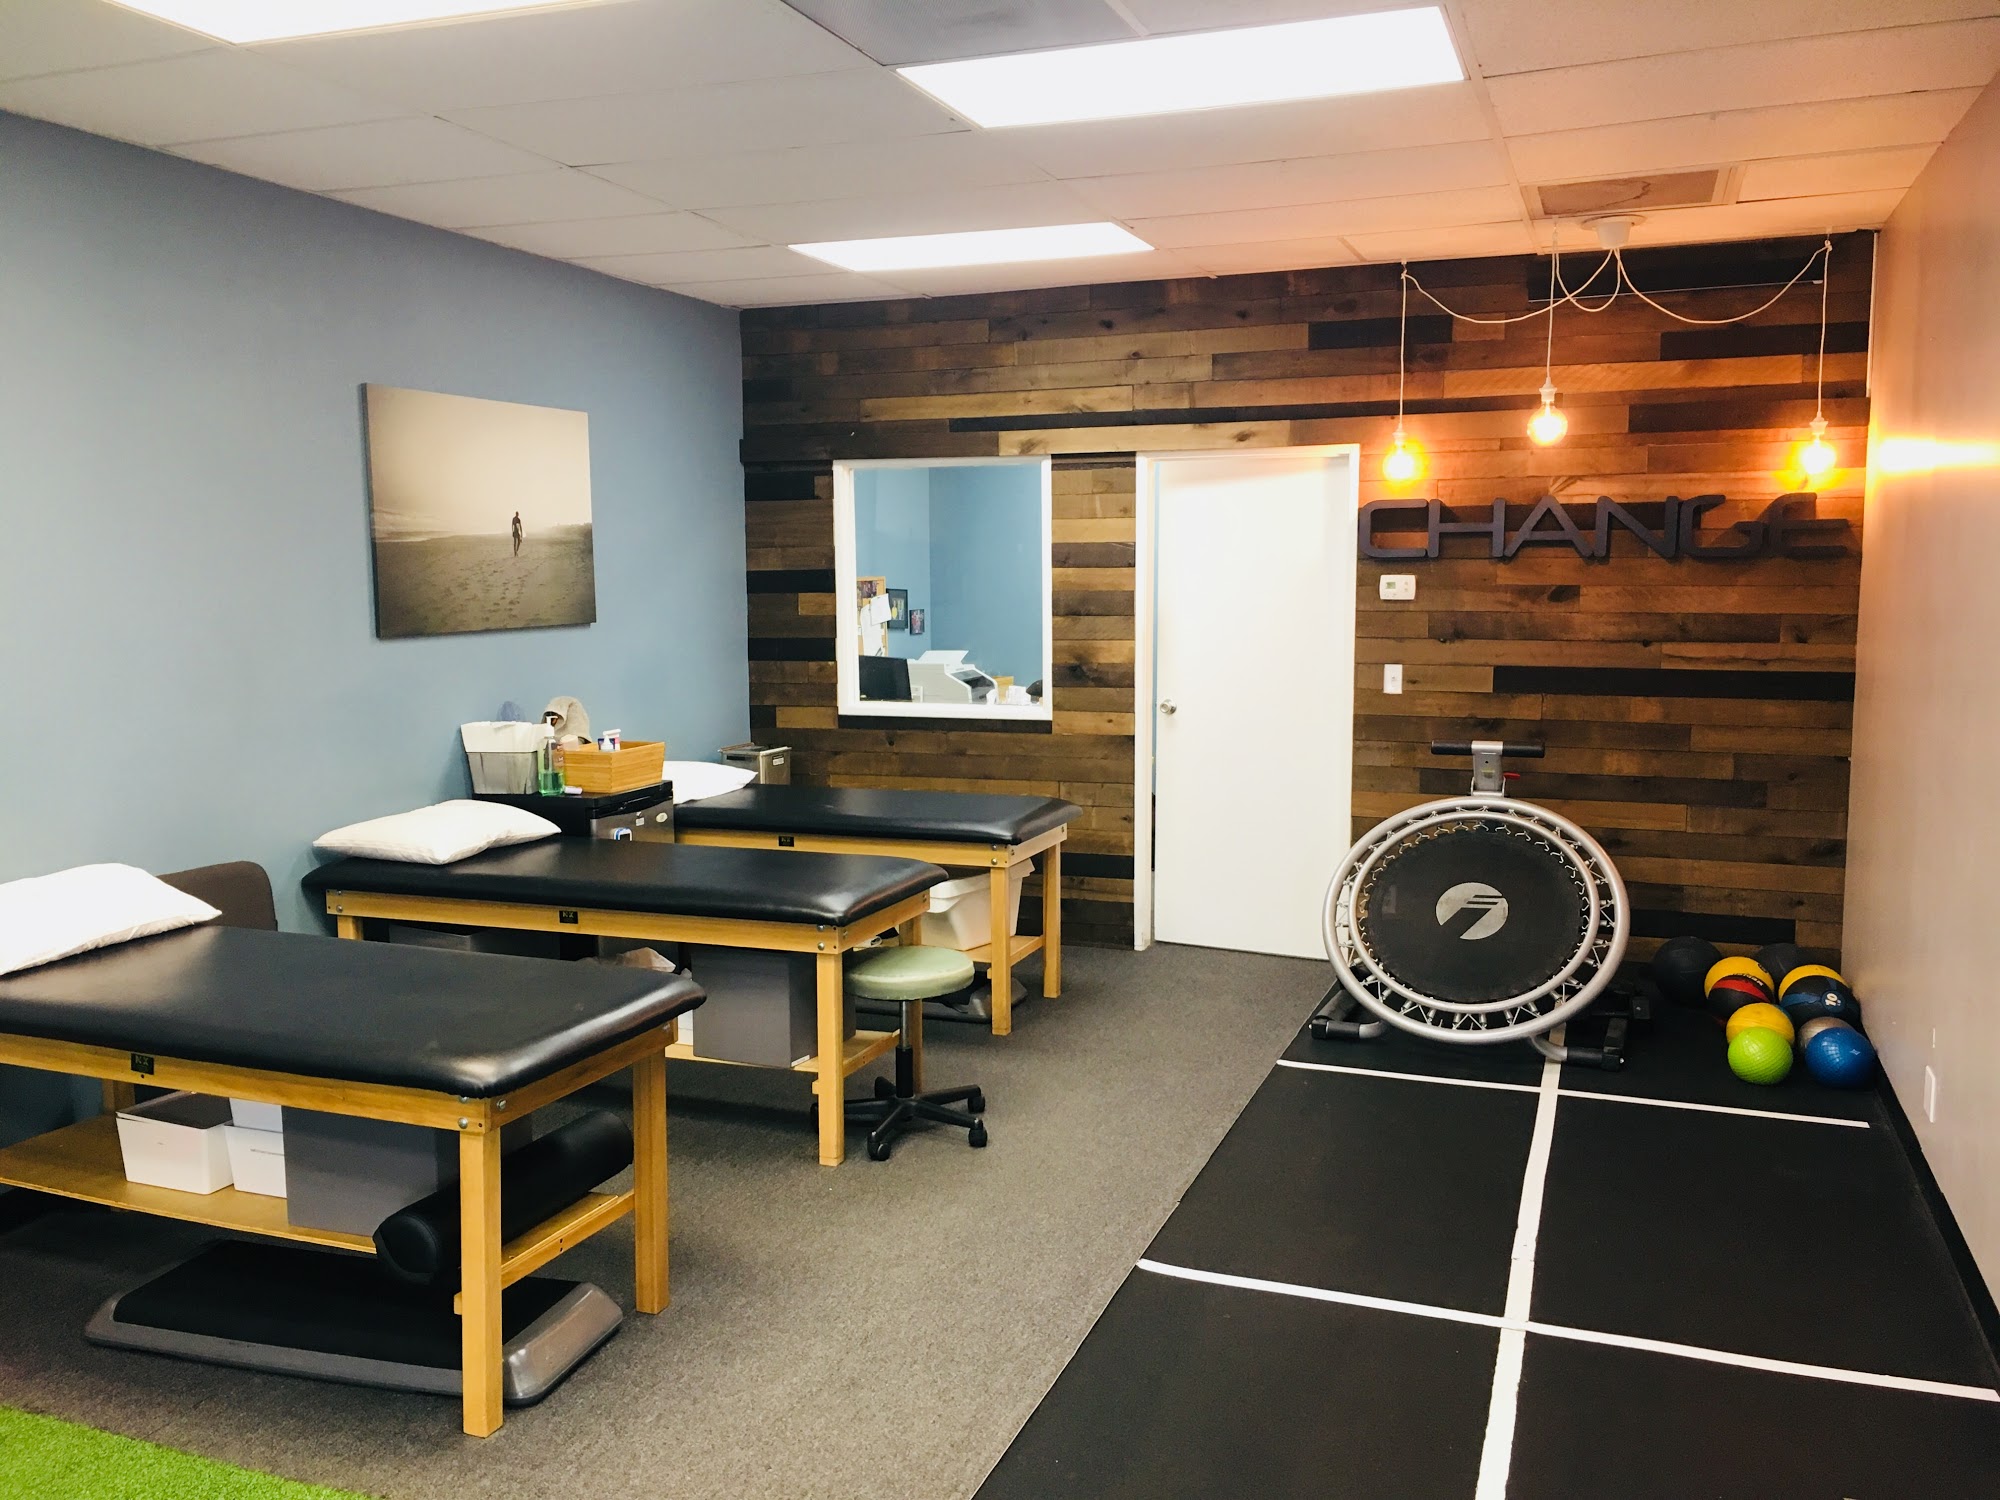 Change Sports Physical Therapy